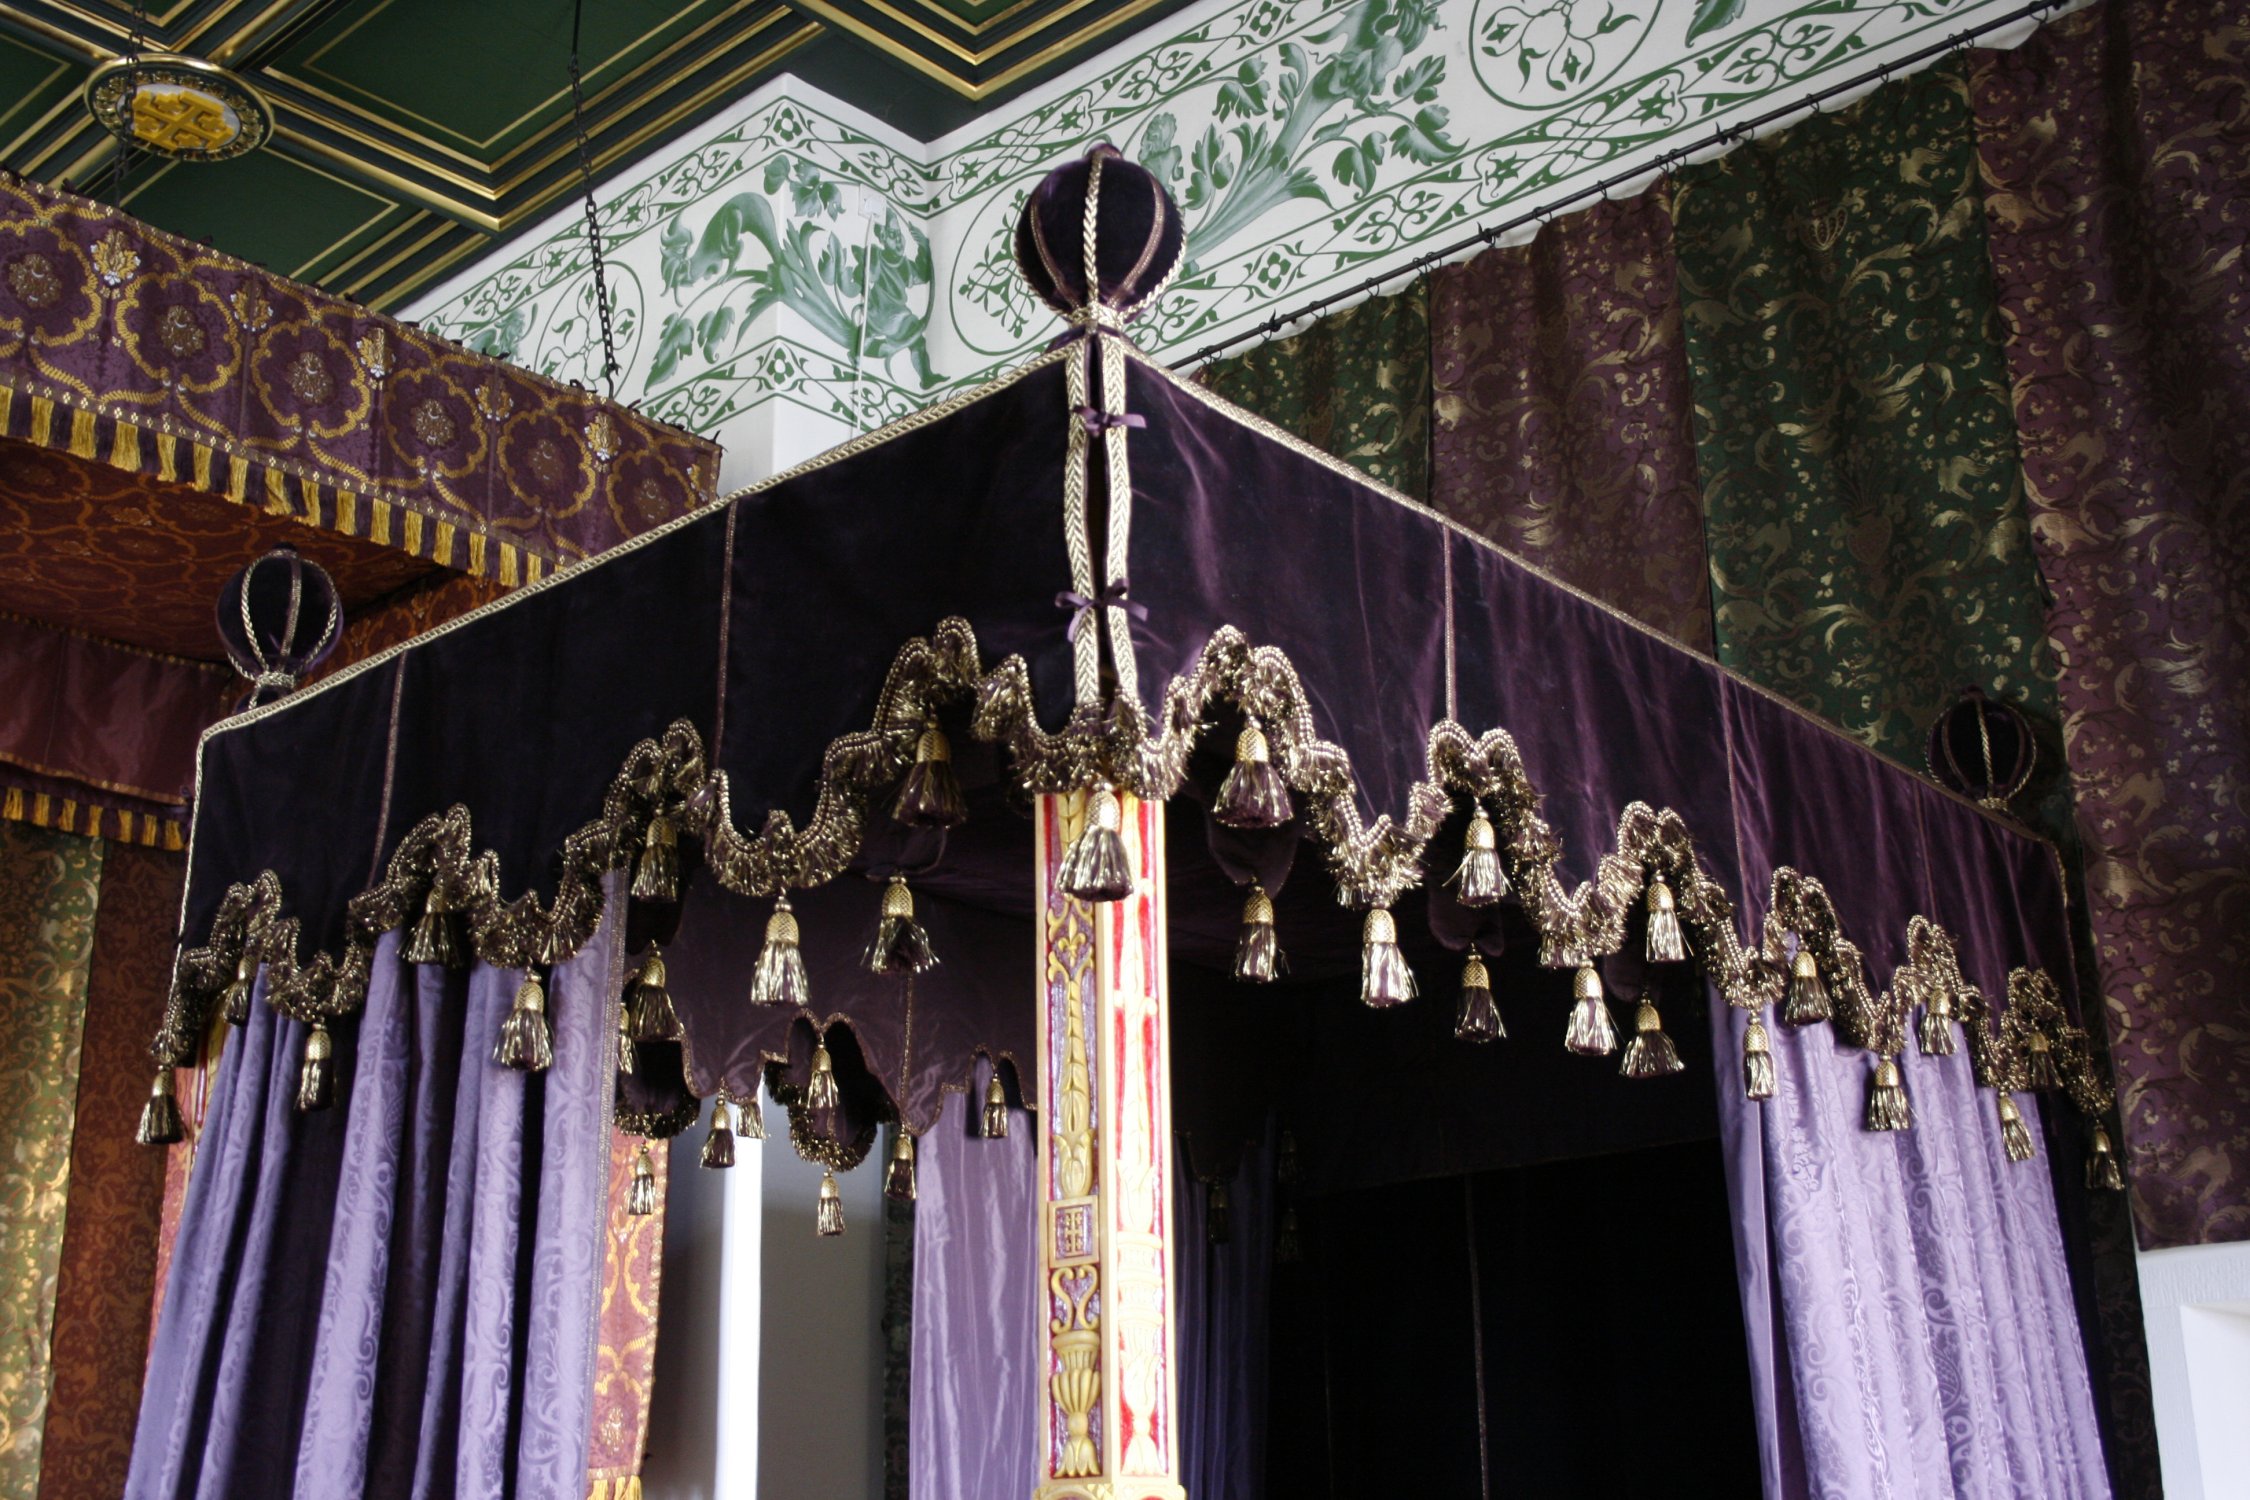 Detail of the Queen's tester bed canopy